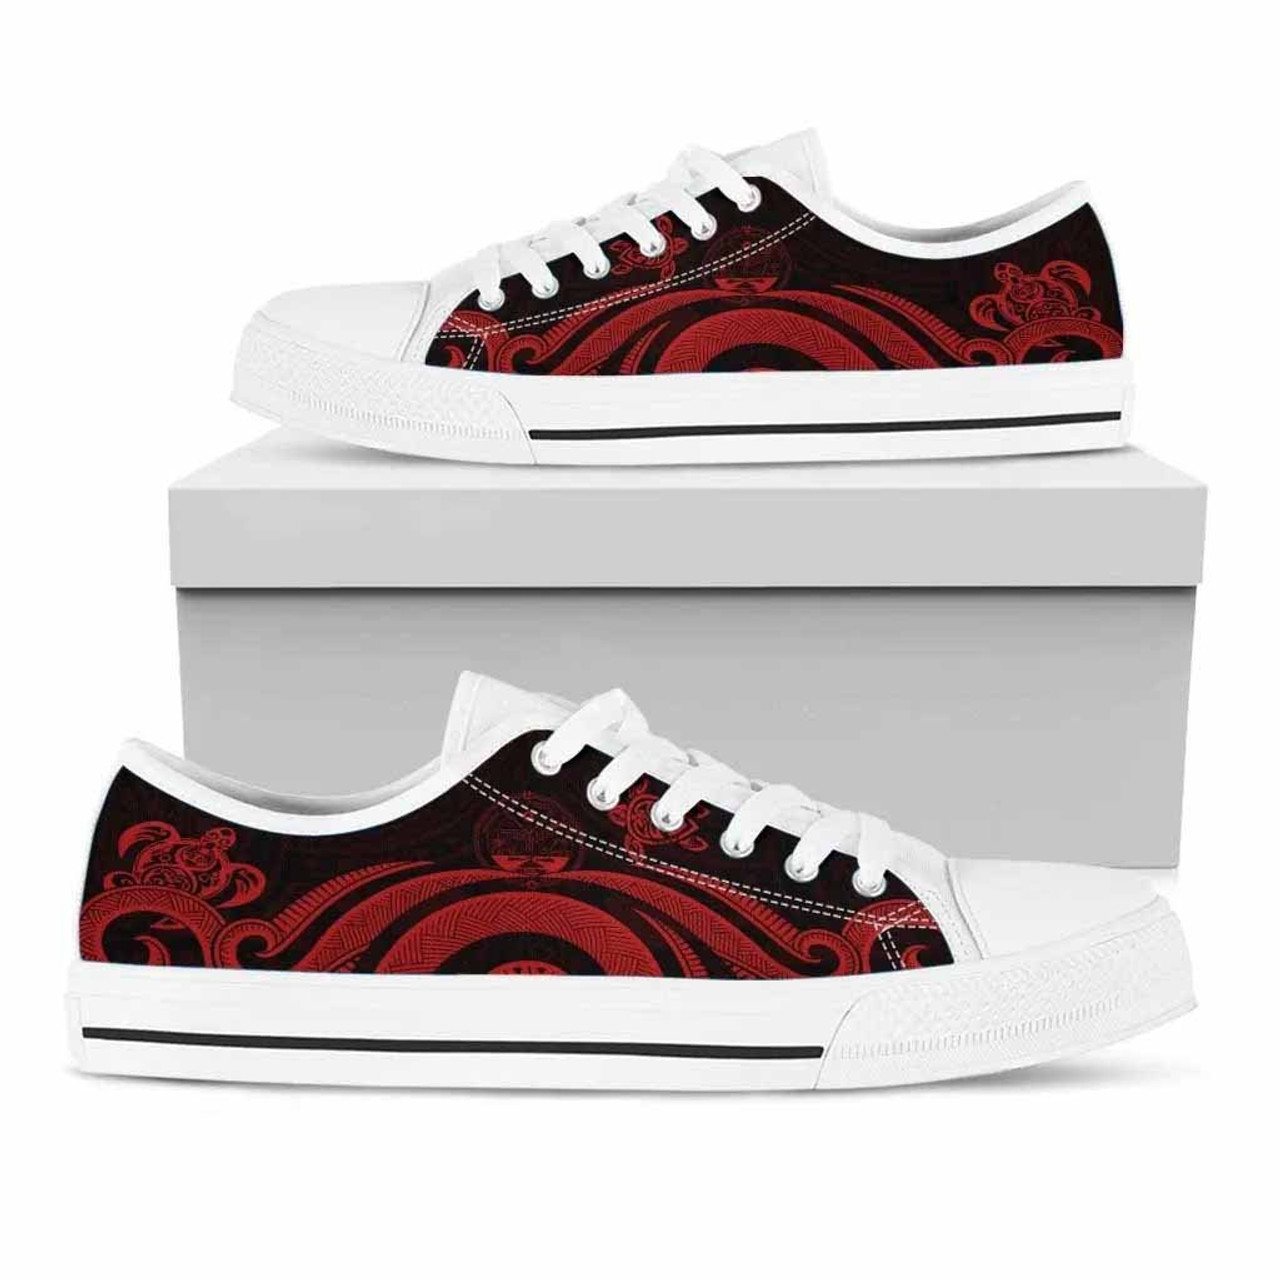 Marshall Islands Low Top Canvas Shoes - Red Tentacle Turtle Crest 6